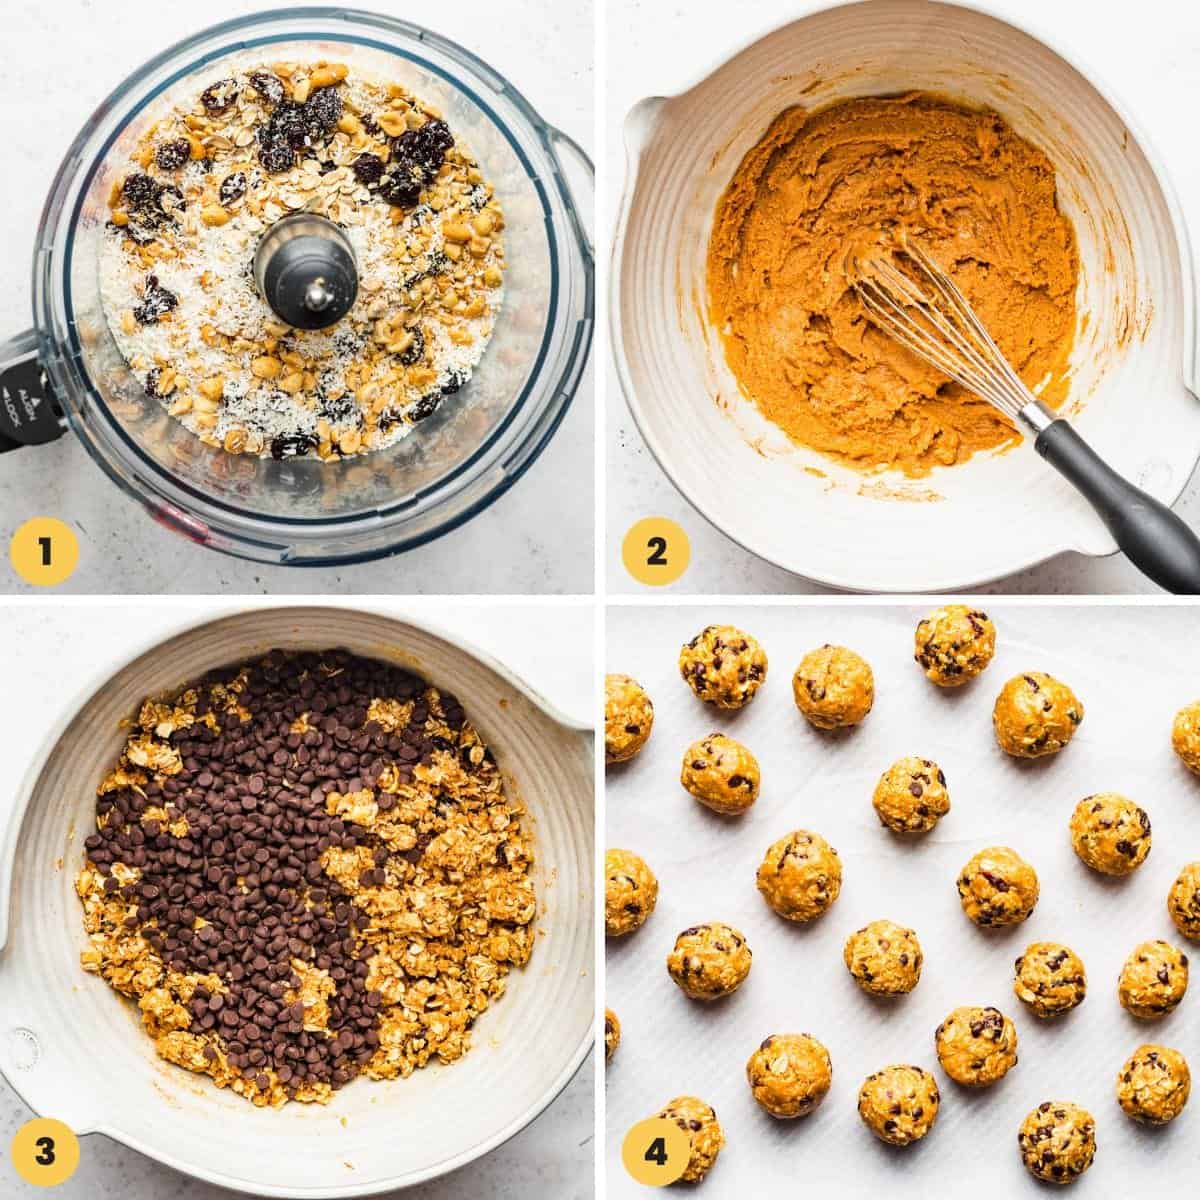 a collage of four images showing how to make no-bake peanut butter oatmeal balls using a food processor and mixing bowl.